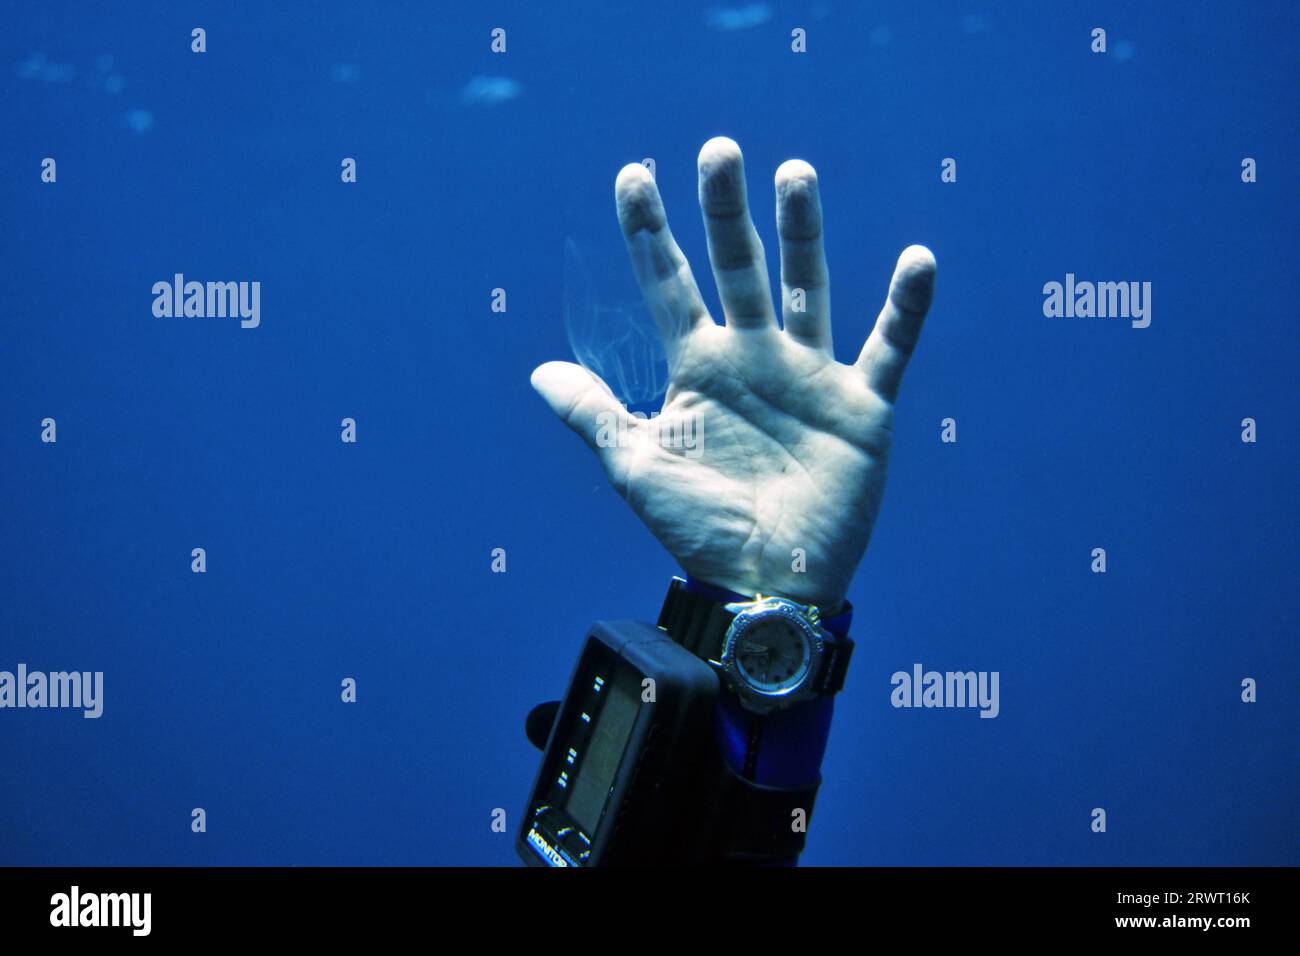 Salp jellyfish with diver's hand as size comparison Stock Photo